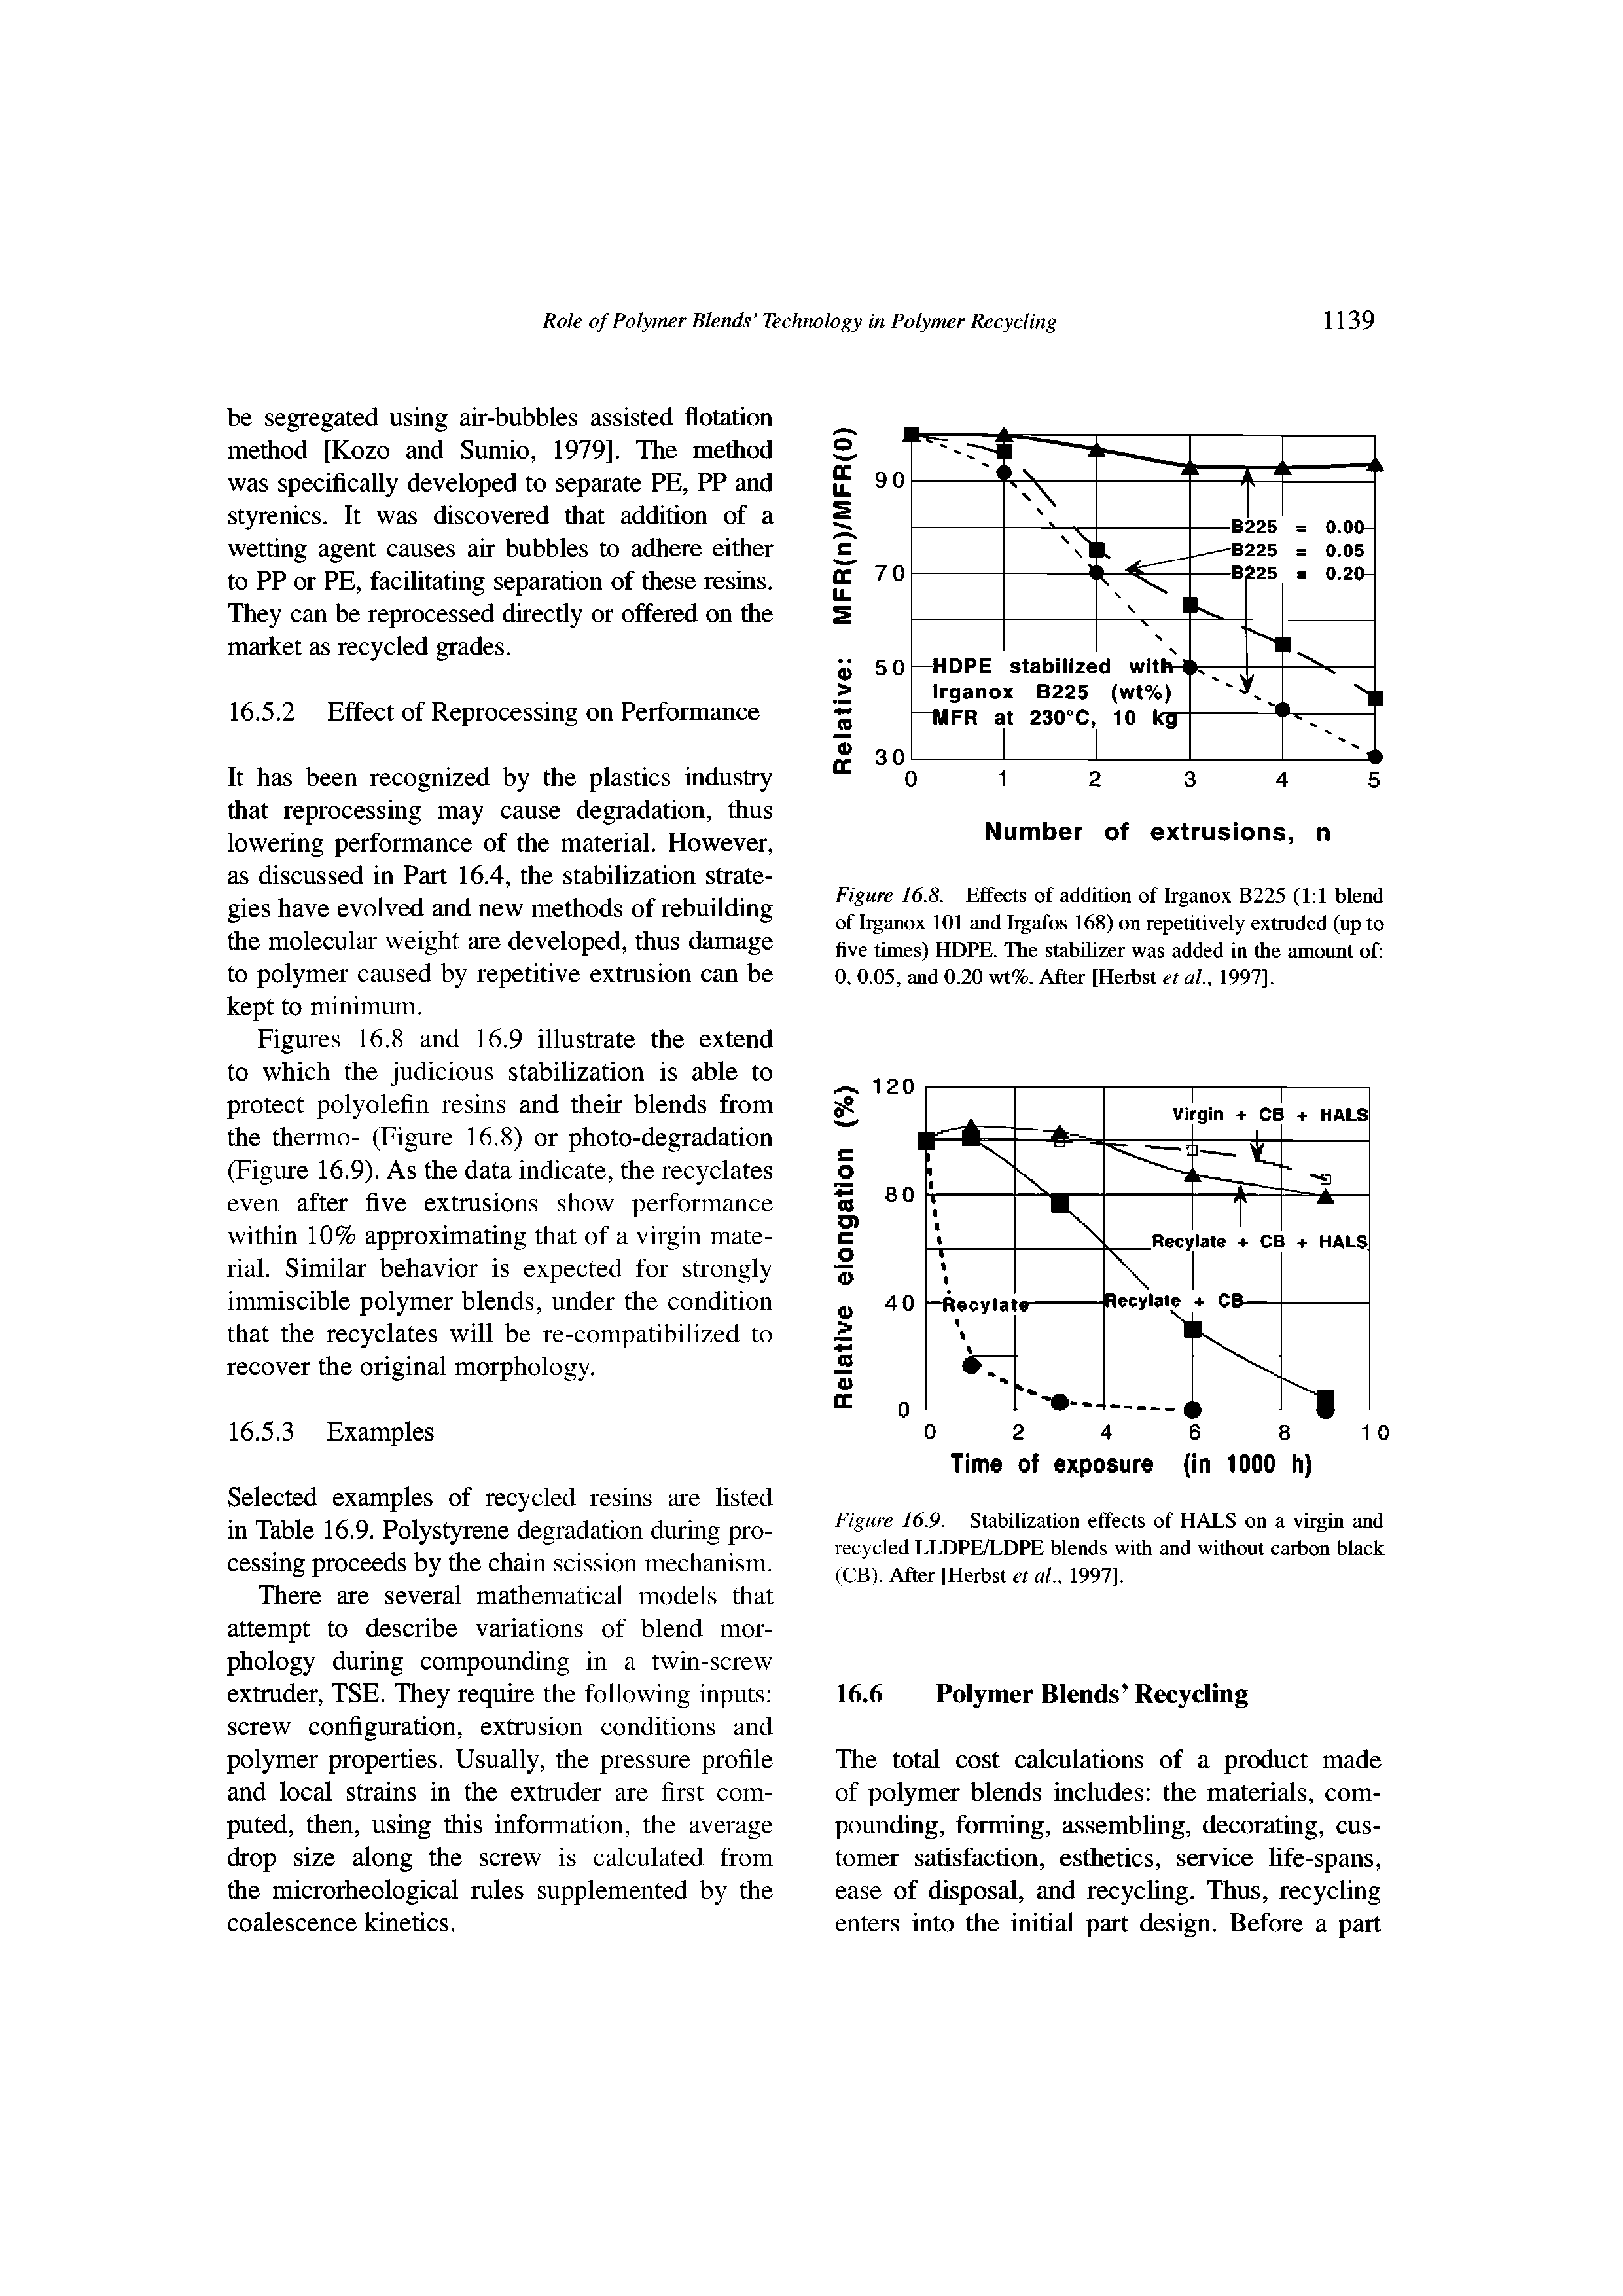 Figure 16.9. Stabilization effects of HALS on a virgin and recycled LLDPE/LDPE blends with and without carbon black (CB). After [Herbst et al., 1997],...